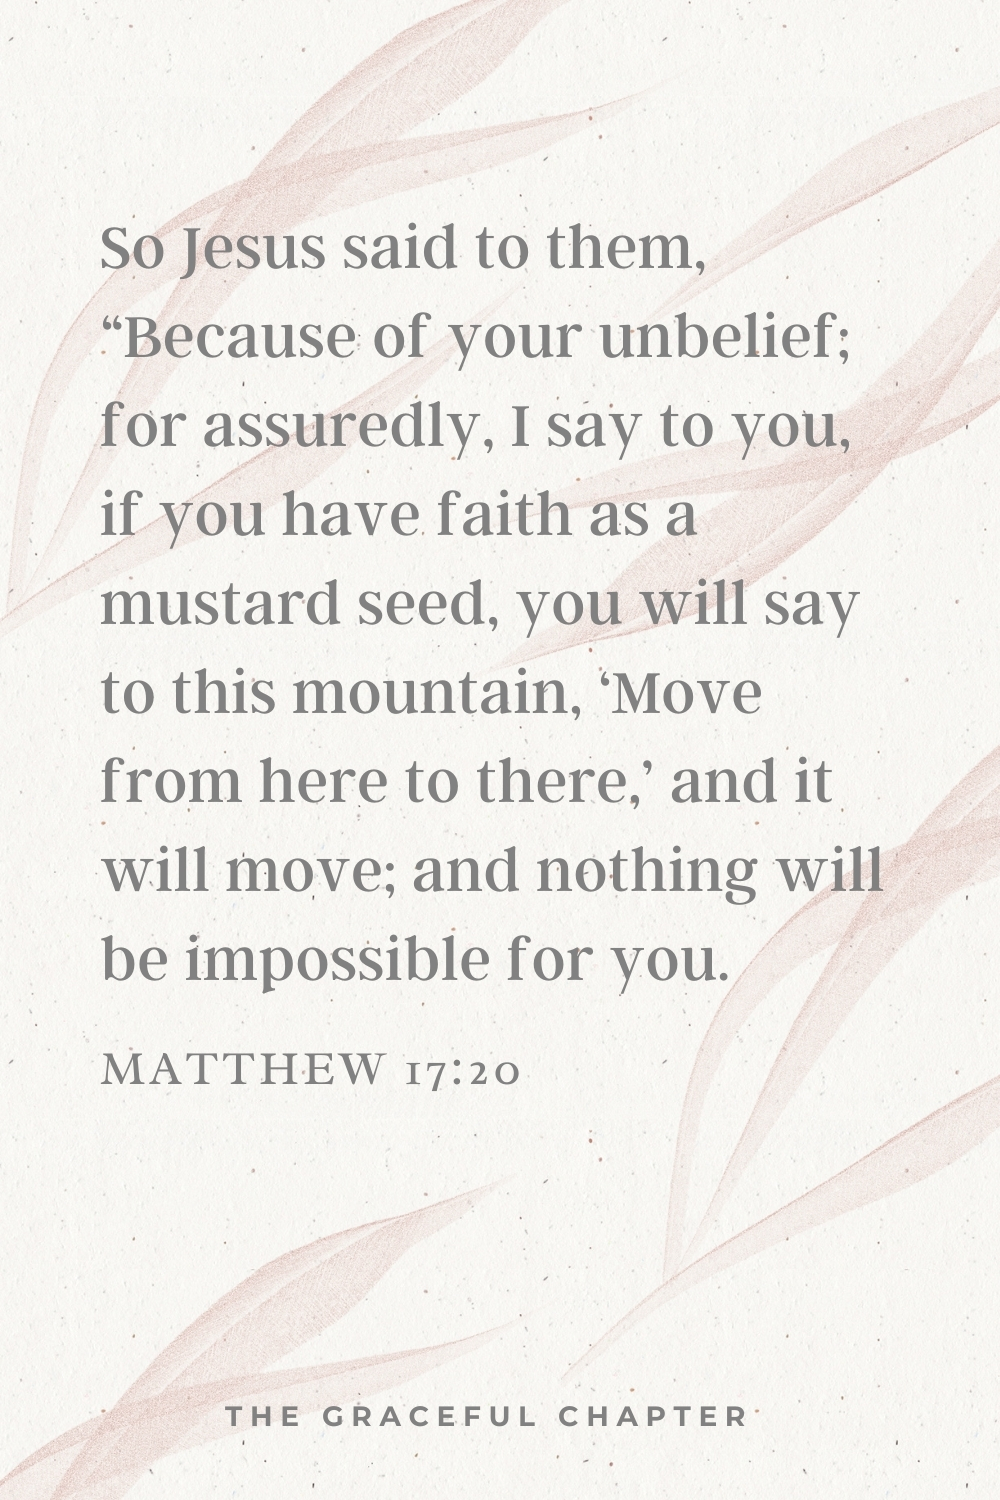 So Jesus said to them, “Because of your unbelief; for assuredly, I say to you, if you have faith as a mustard seed, you will say to this mountain, ‘Move from here to there,’ and it will move; and nothing will be impossible for you.  Matthew 17:20